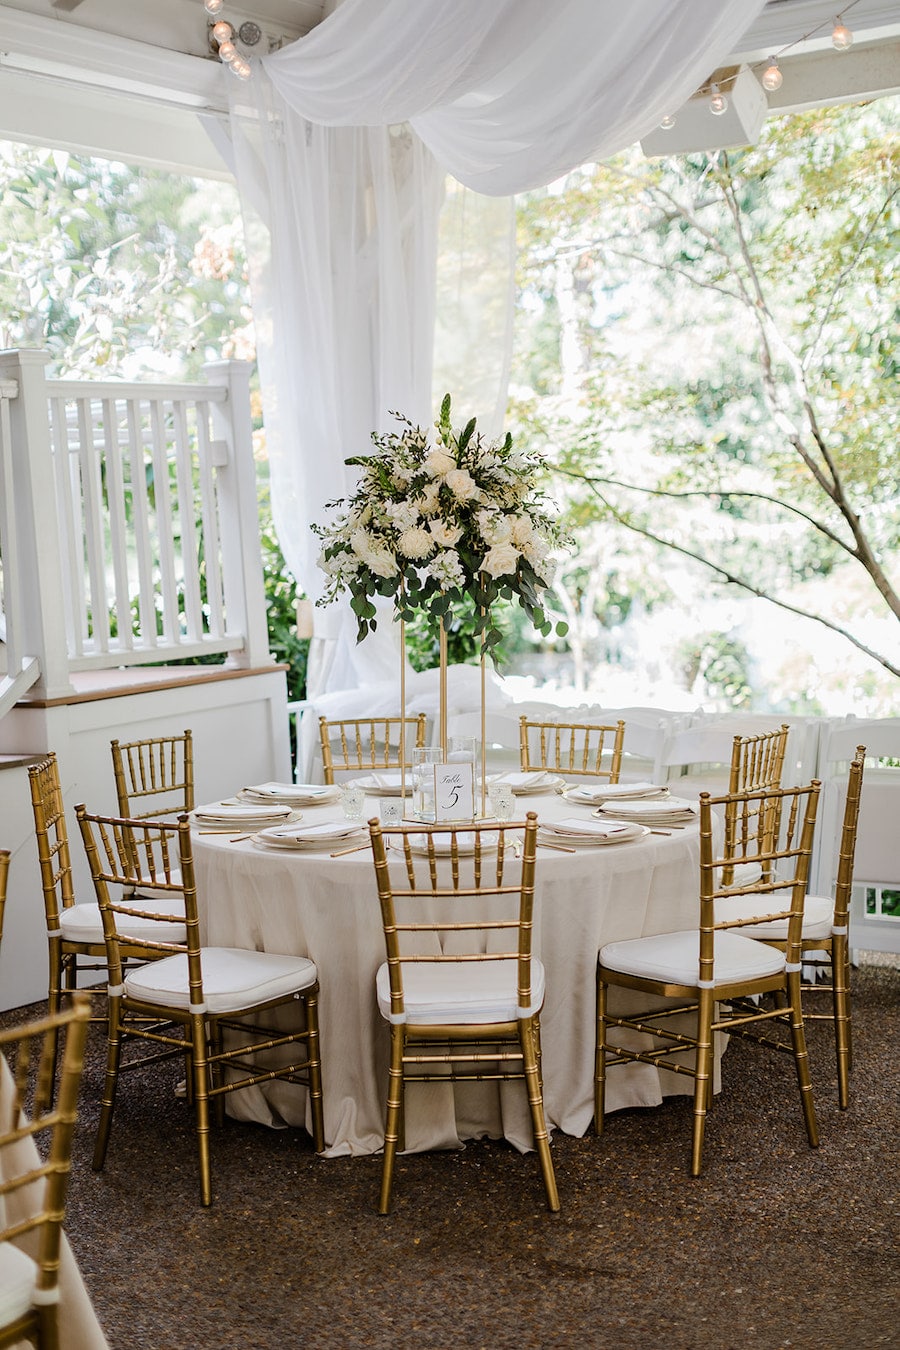 Ivory Wedding with Greenery and Candles at Franklin, TN Venue